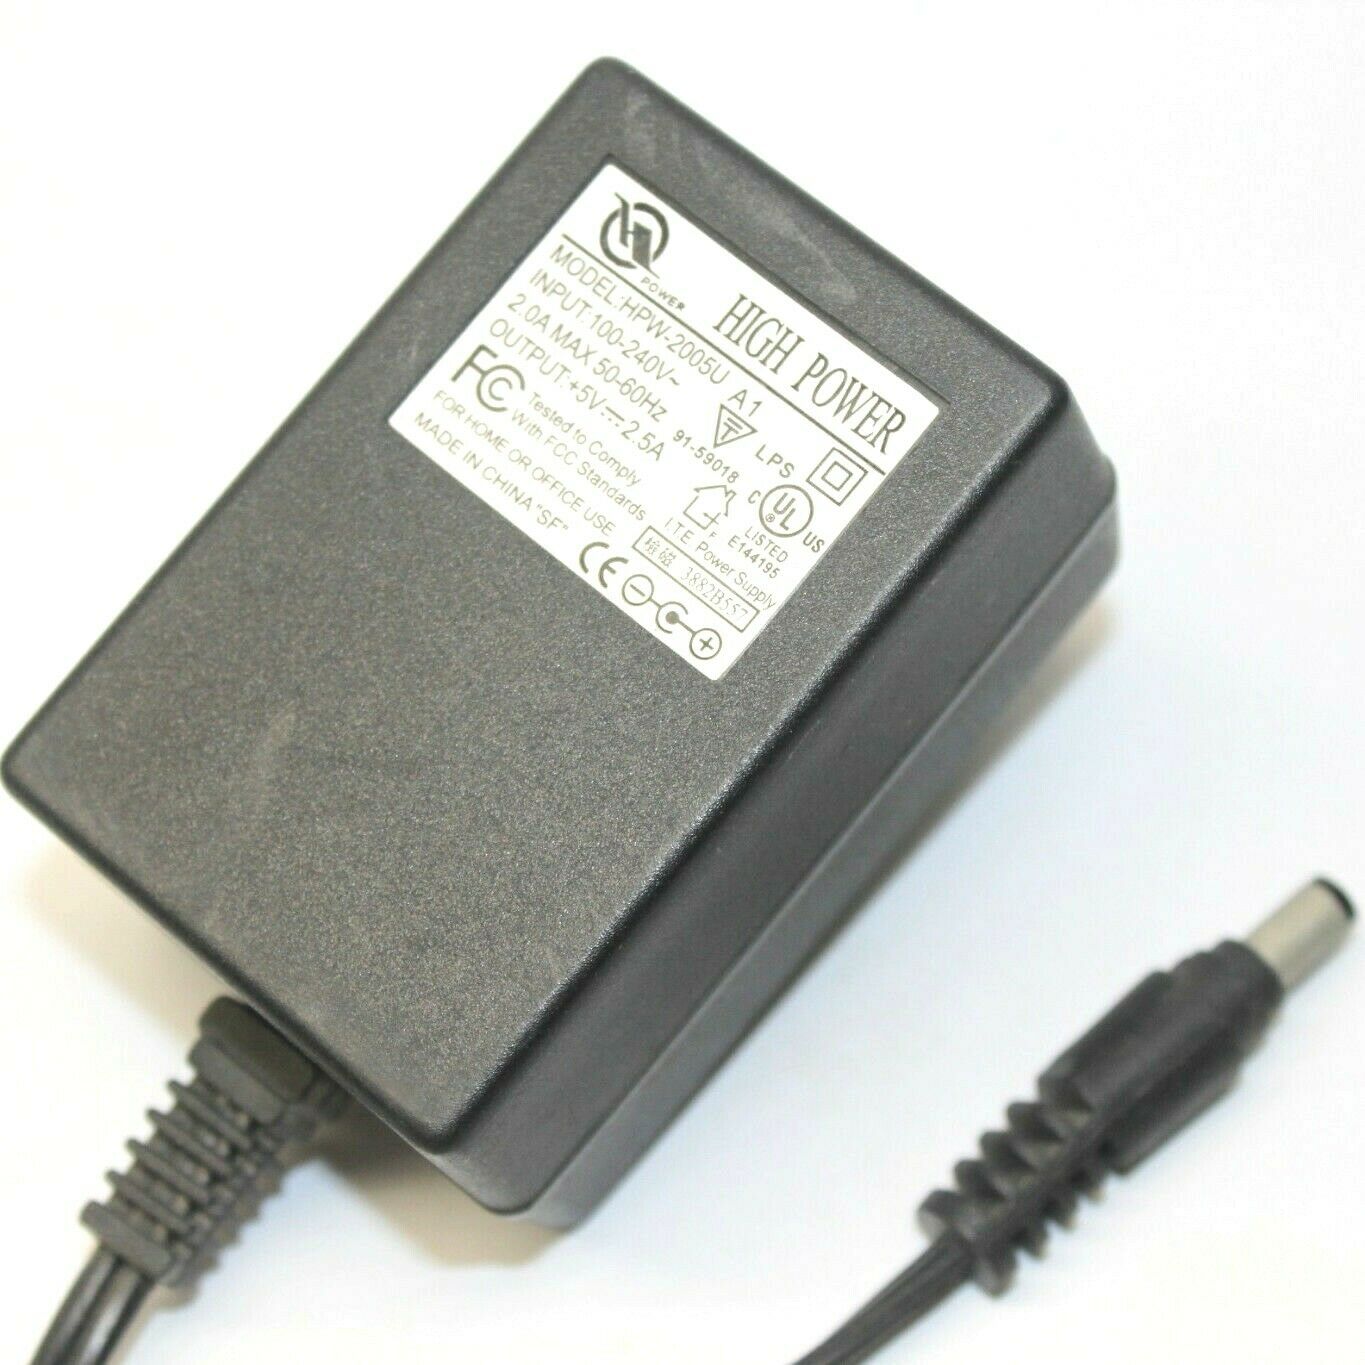 New High Power HPW-2005U Power Supply DC 5V 2.5A Adapter - Click Image to Close